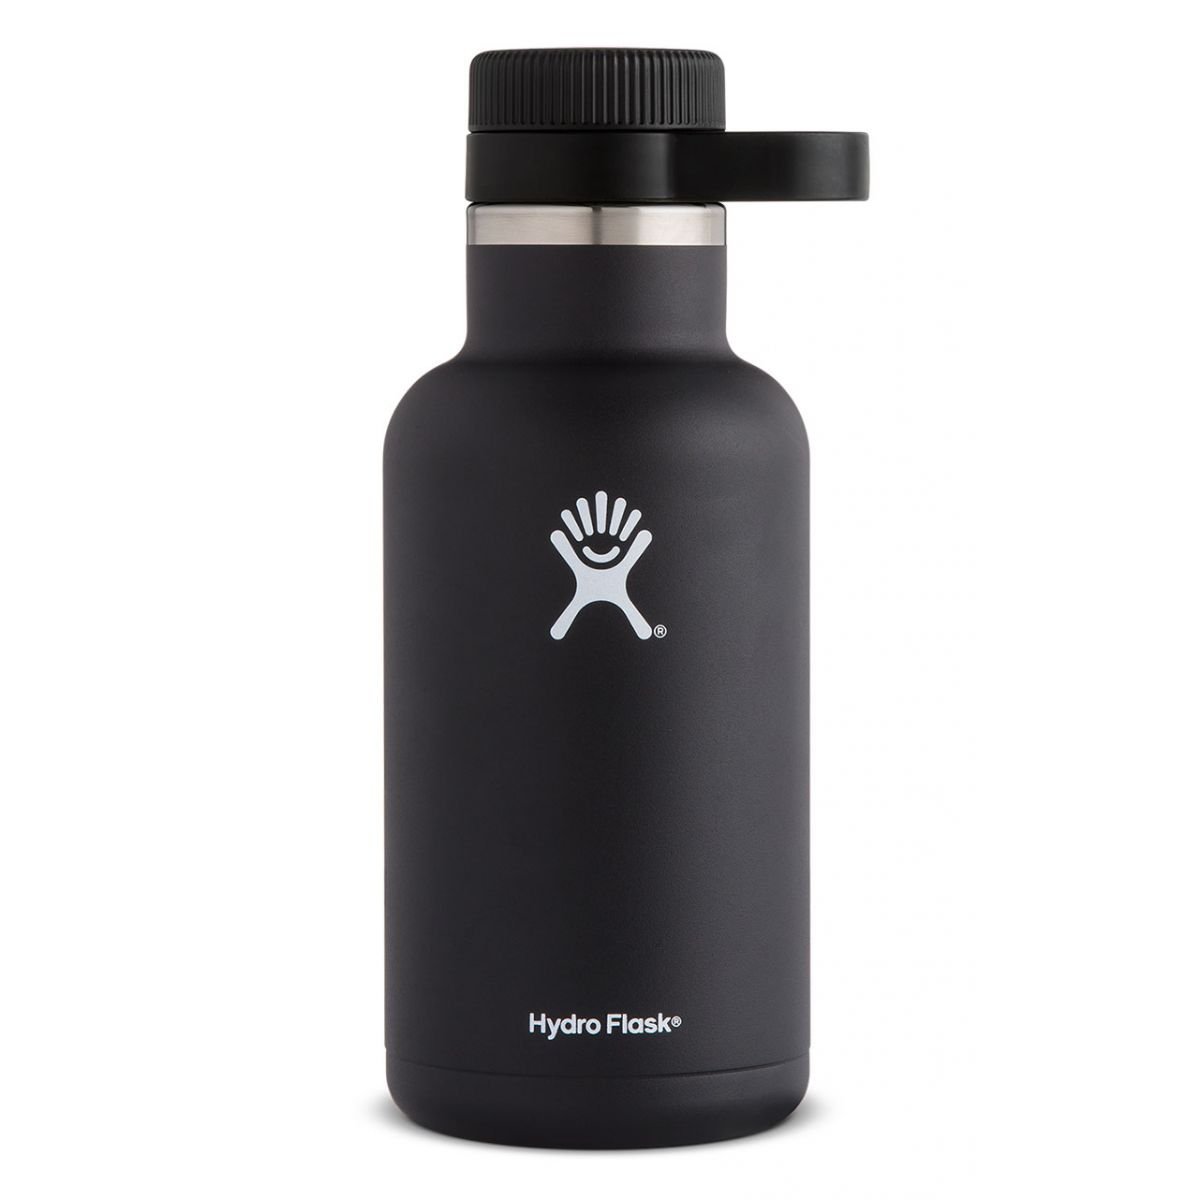 hydro-flask-stainless-steel-vacuum-insulated-growler-64-oz-black